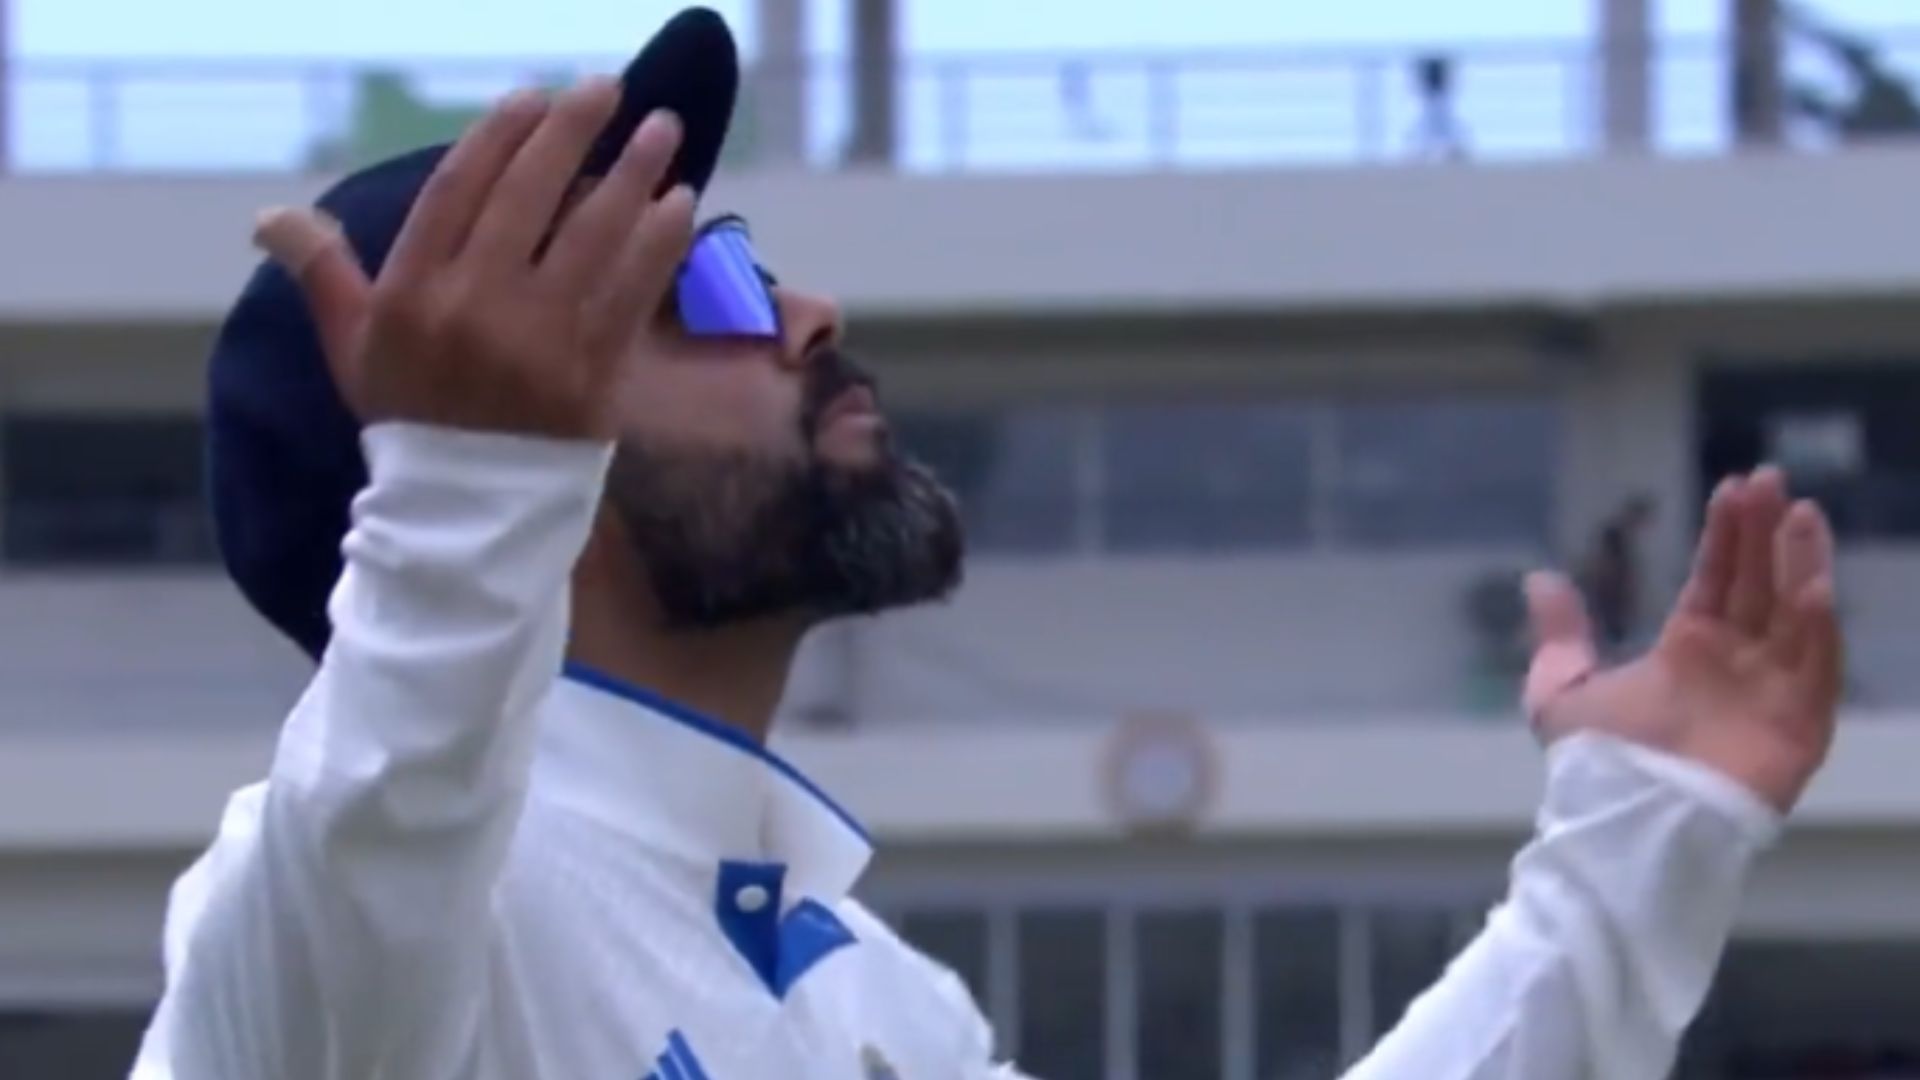 Virat Kohli was soaking in every moment while on the field (P.C.:FanCode)